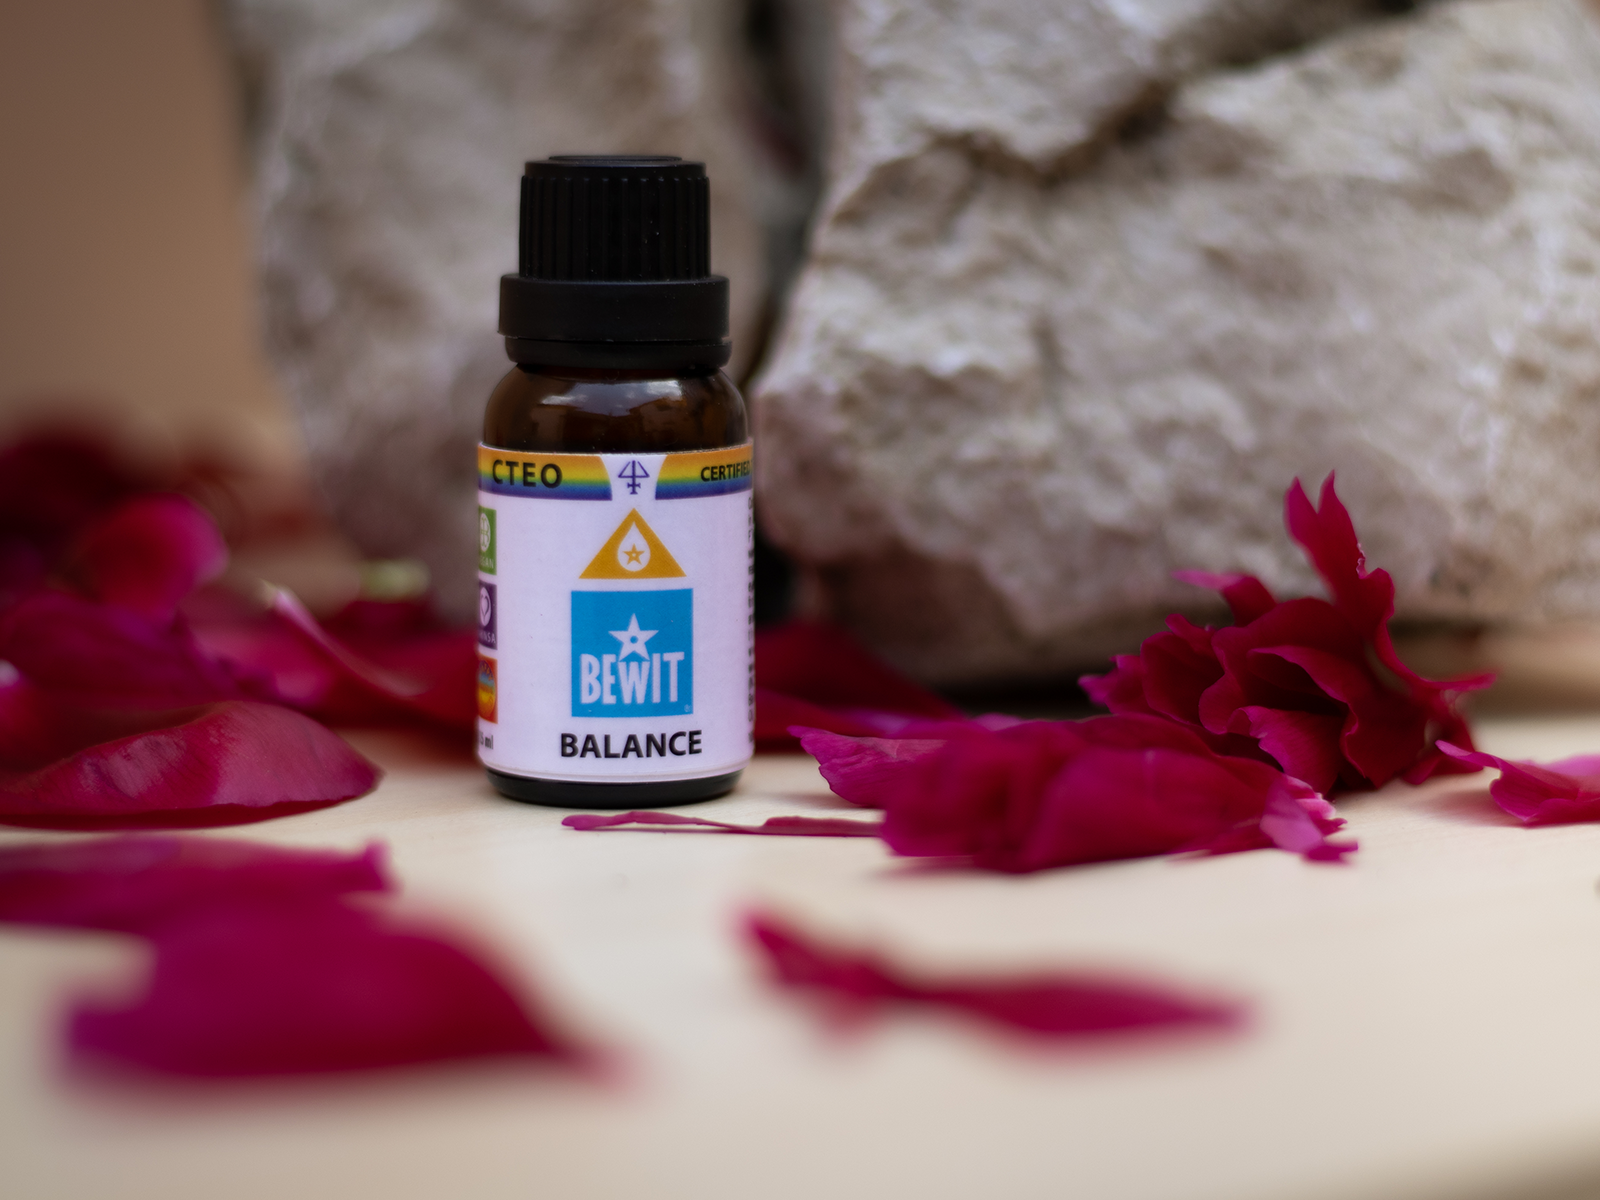 BEWIT BALANCE - This is blend of the essential oils - 5